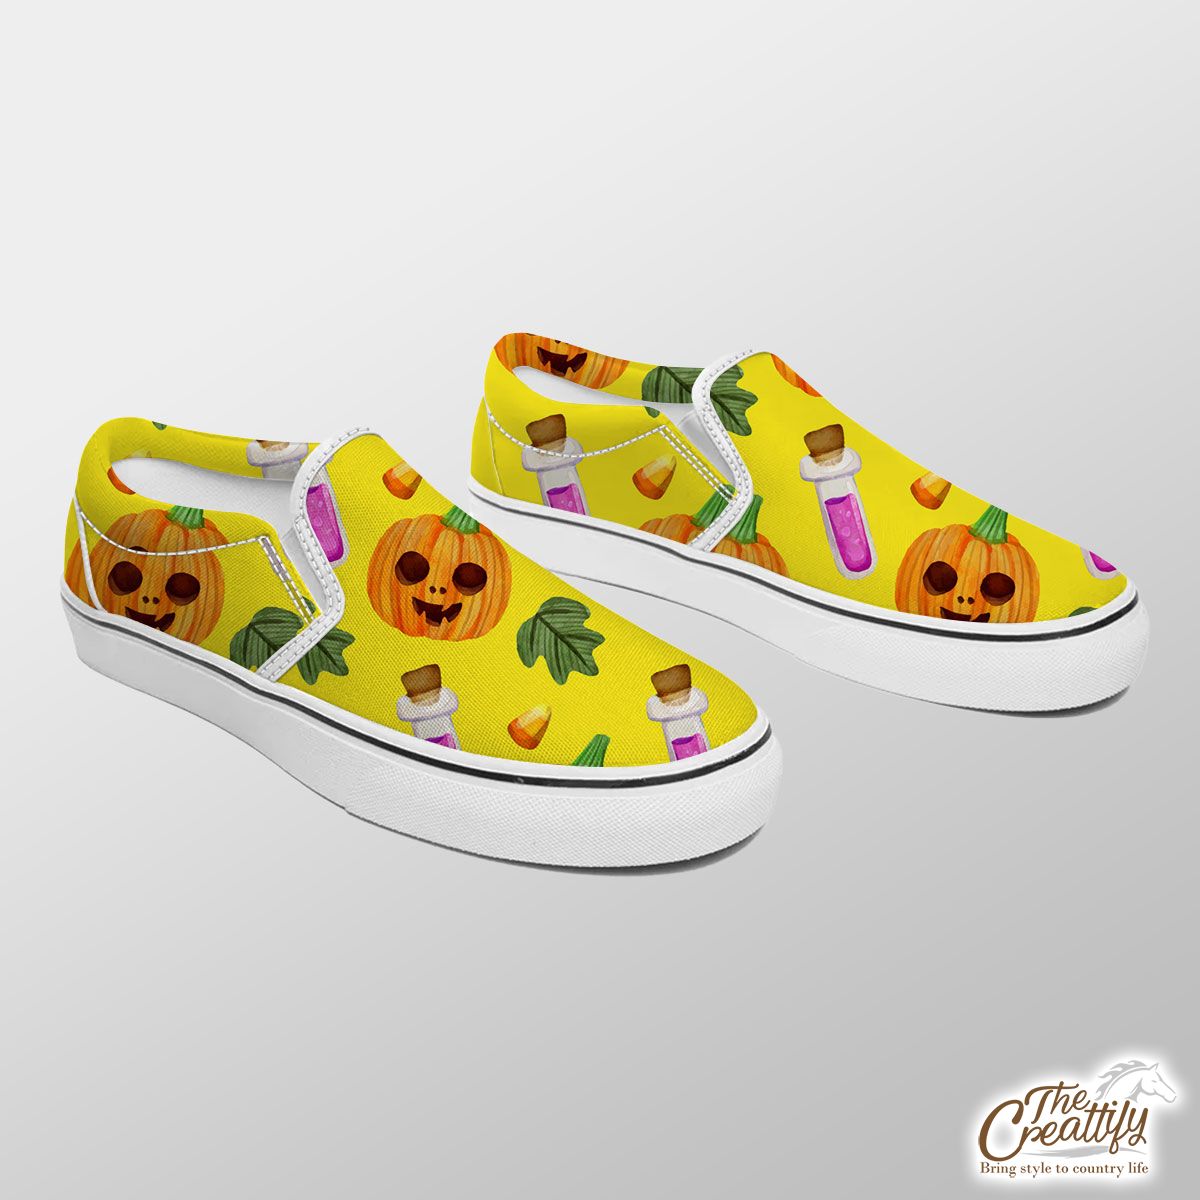 Scary Pumpkin Face and Witch Potions Yellow Halloween Slip On Sneakers